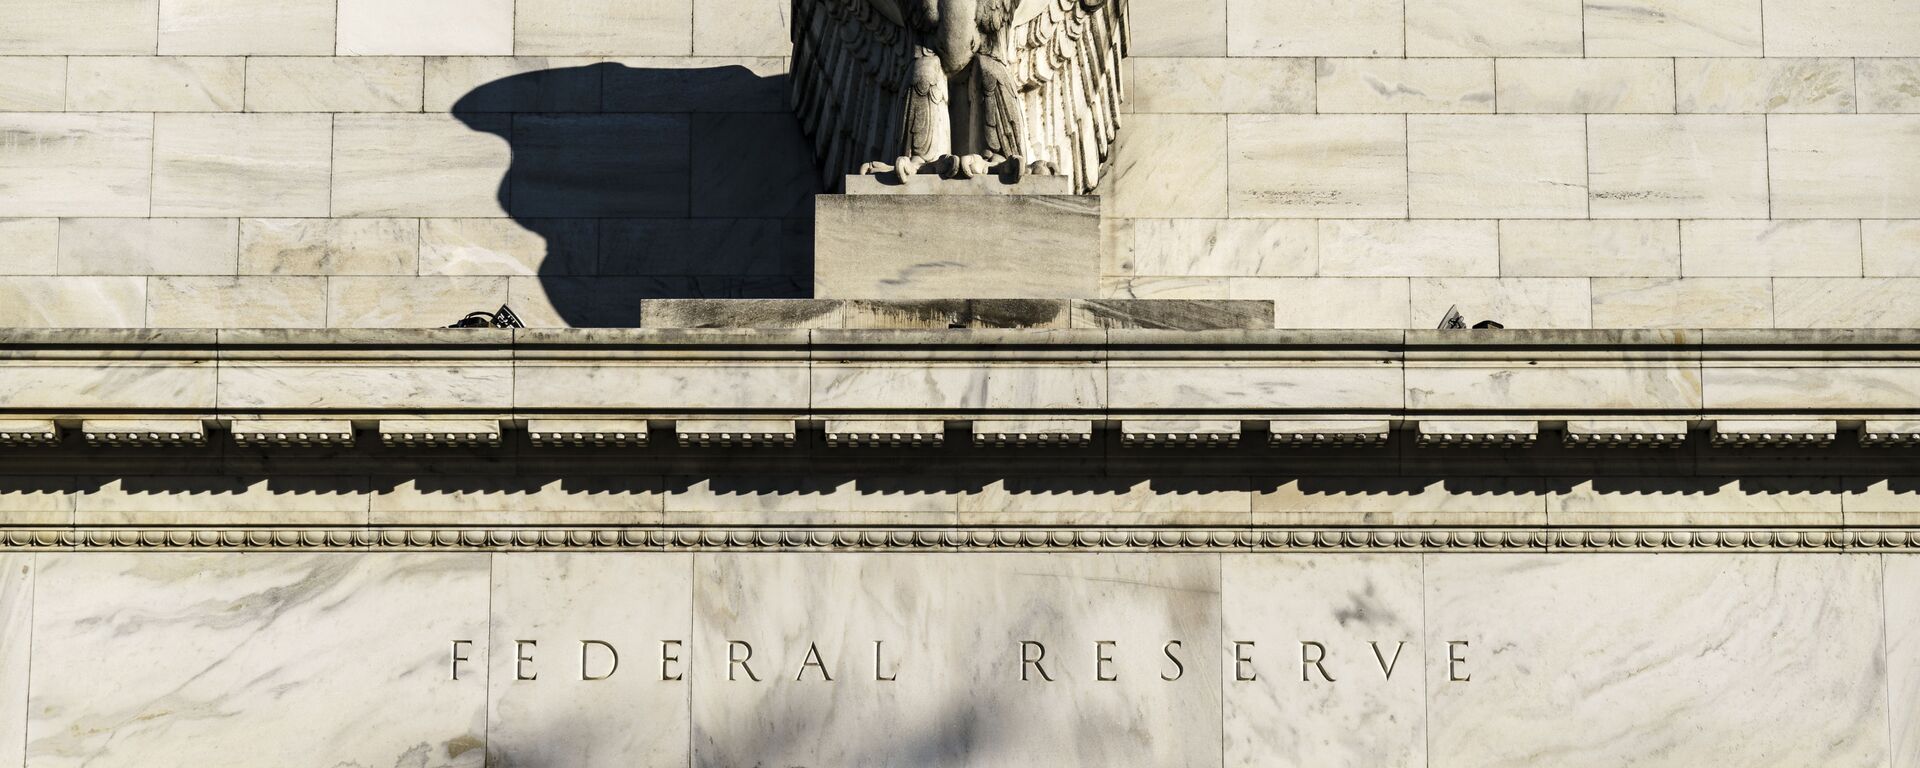 The Federal Reserve is seen in Washington, Monday, Nov. 16, 2020. President Donald Trump's unorthodox choice for the Federal Reserve Board of Governors, Judy Shelton, could be approved by the Senate this week, according to Majority Leader Mitch McConnell's office. - Sputnik International, 1920, 20.09.2023